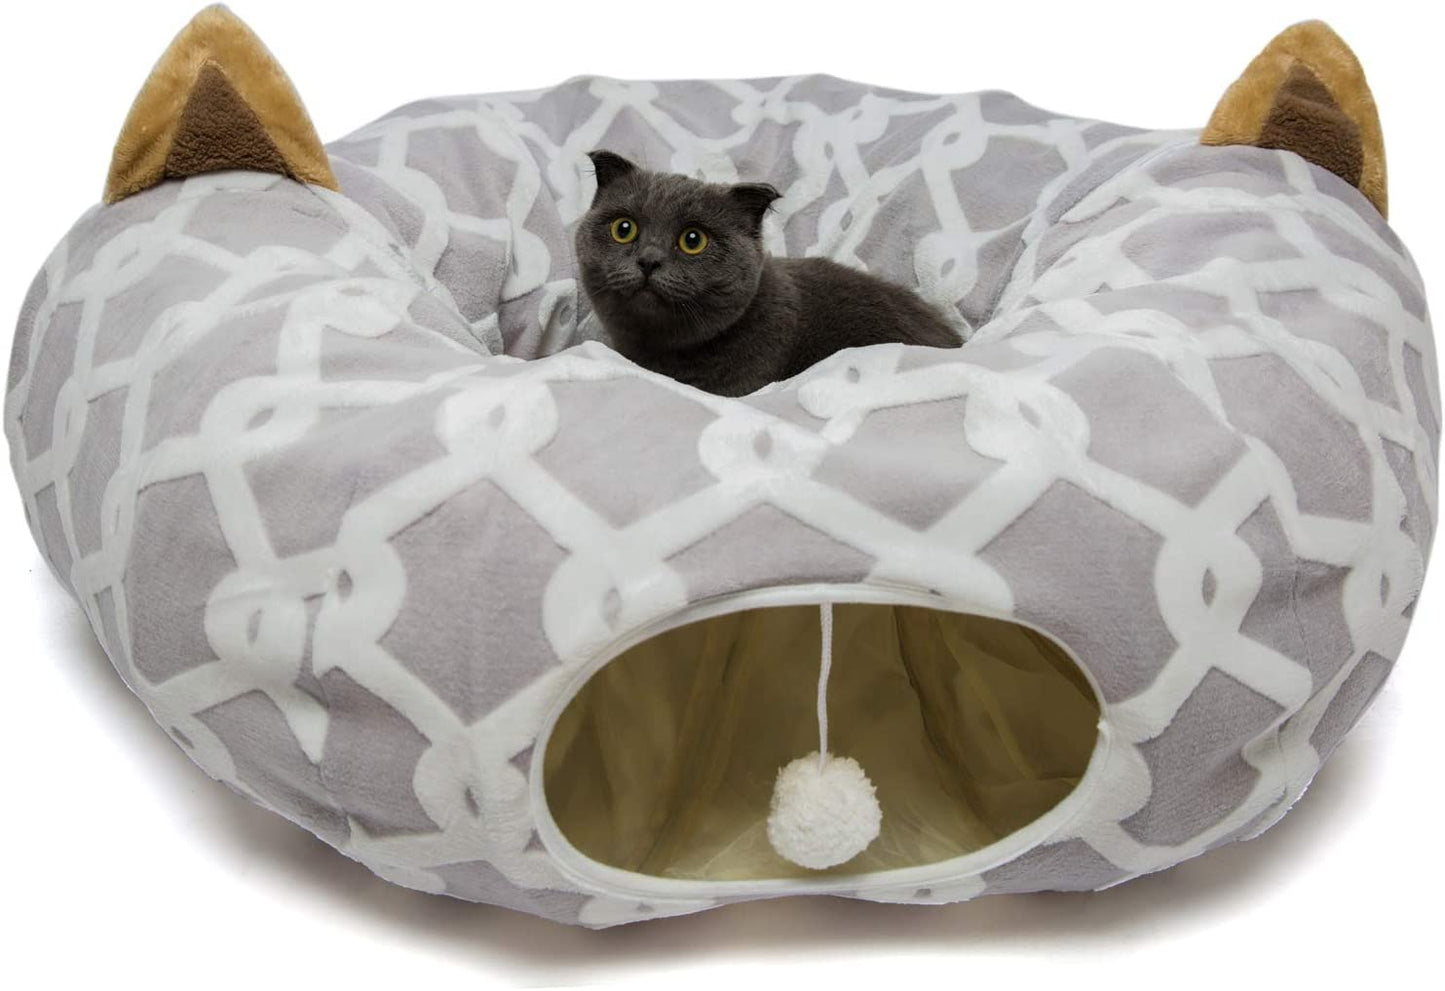 Spacious Cat Tunnel Bed with Plush Cover, Fluffy Toy Balls, Small Cushion, and Flexible Design - 10 Inch Diameter, 3 Ft Length - Perfect for Cats, Stylish Gray Geometric Figure